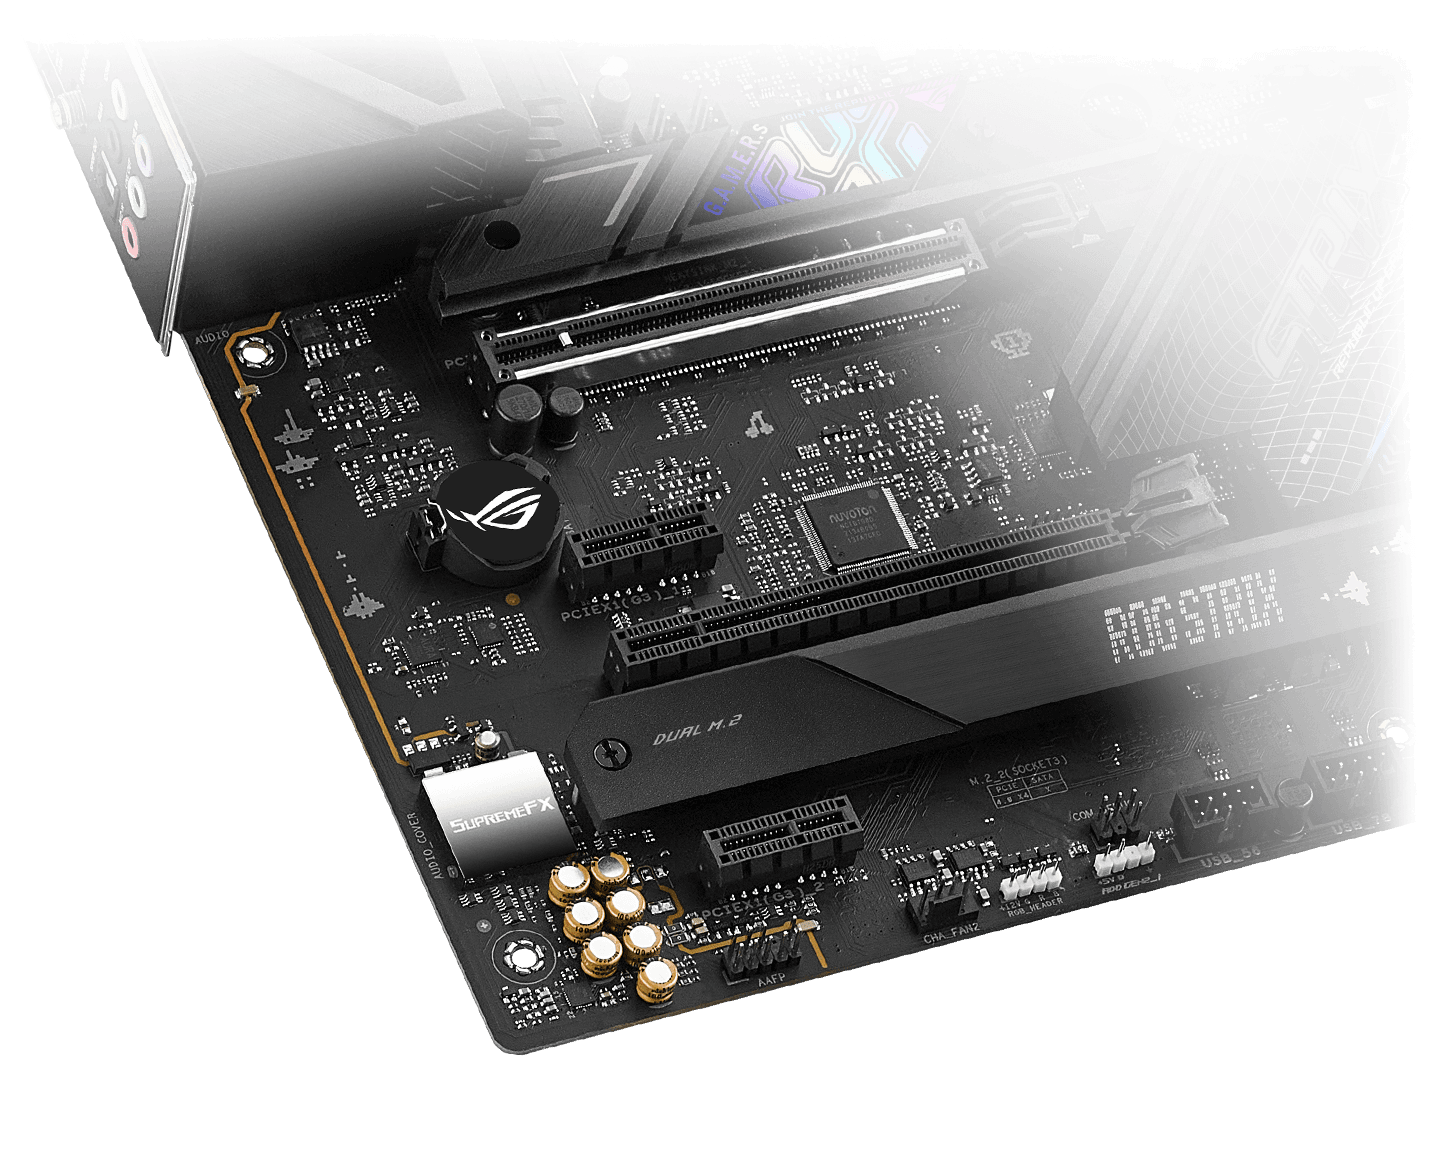 The Strix B760-F motherboard features SupremeFX audio.